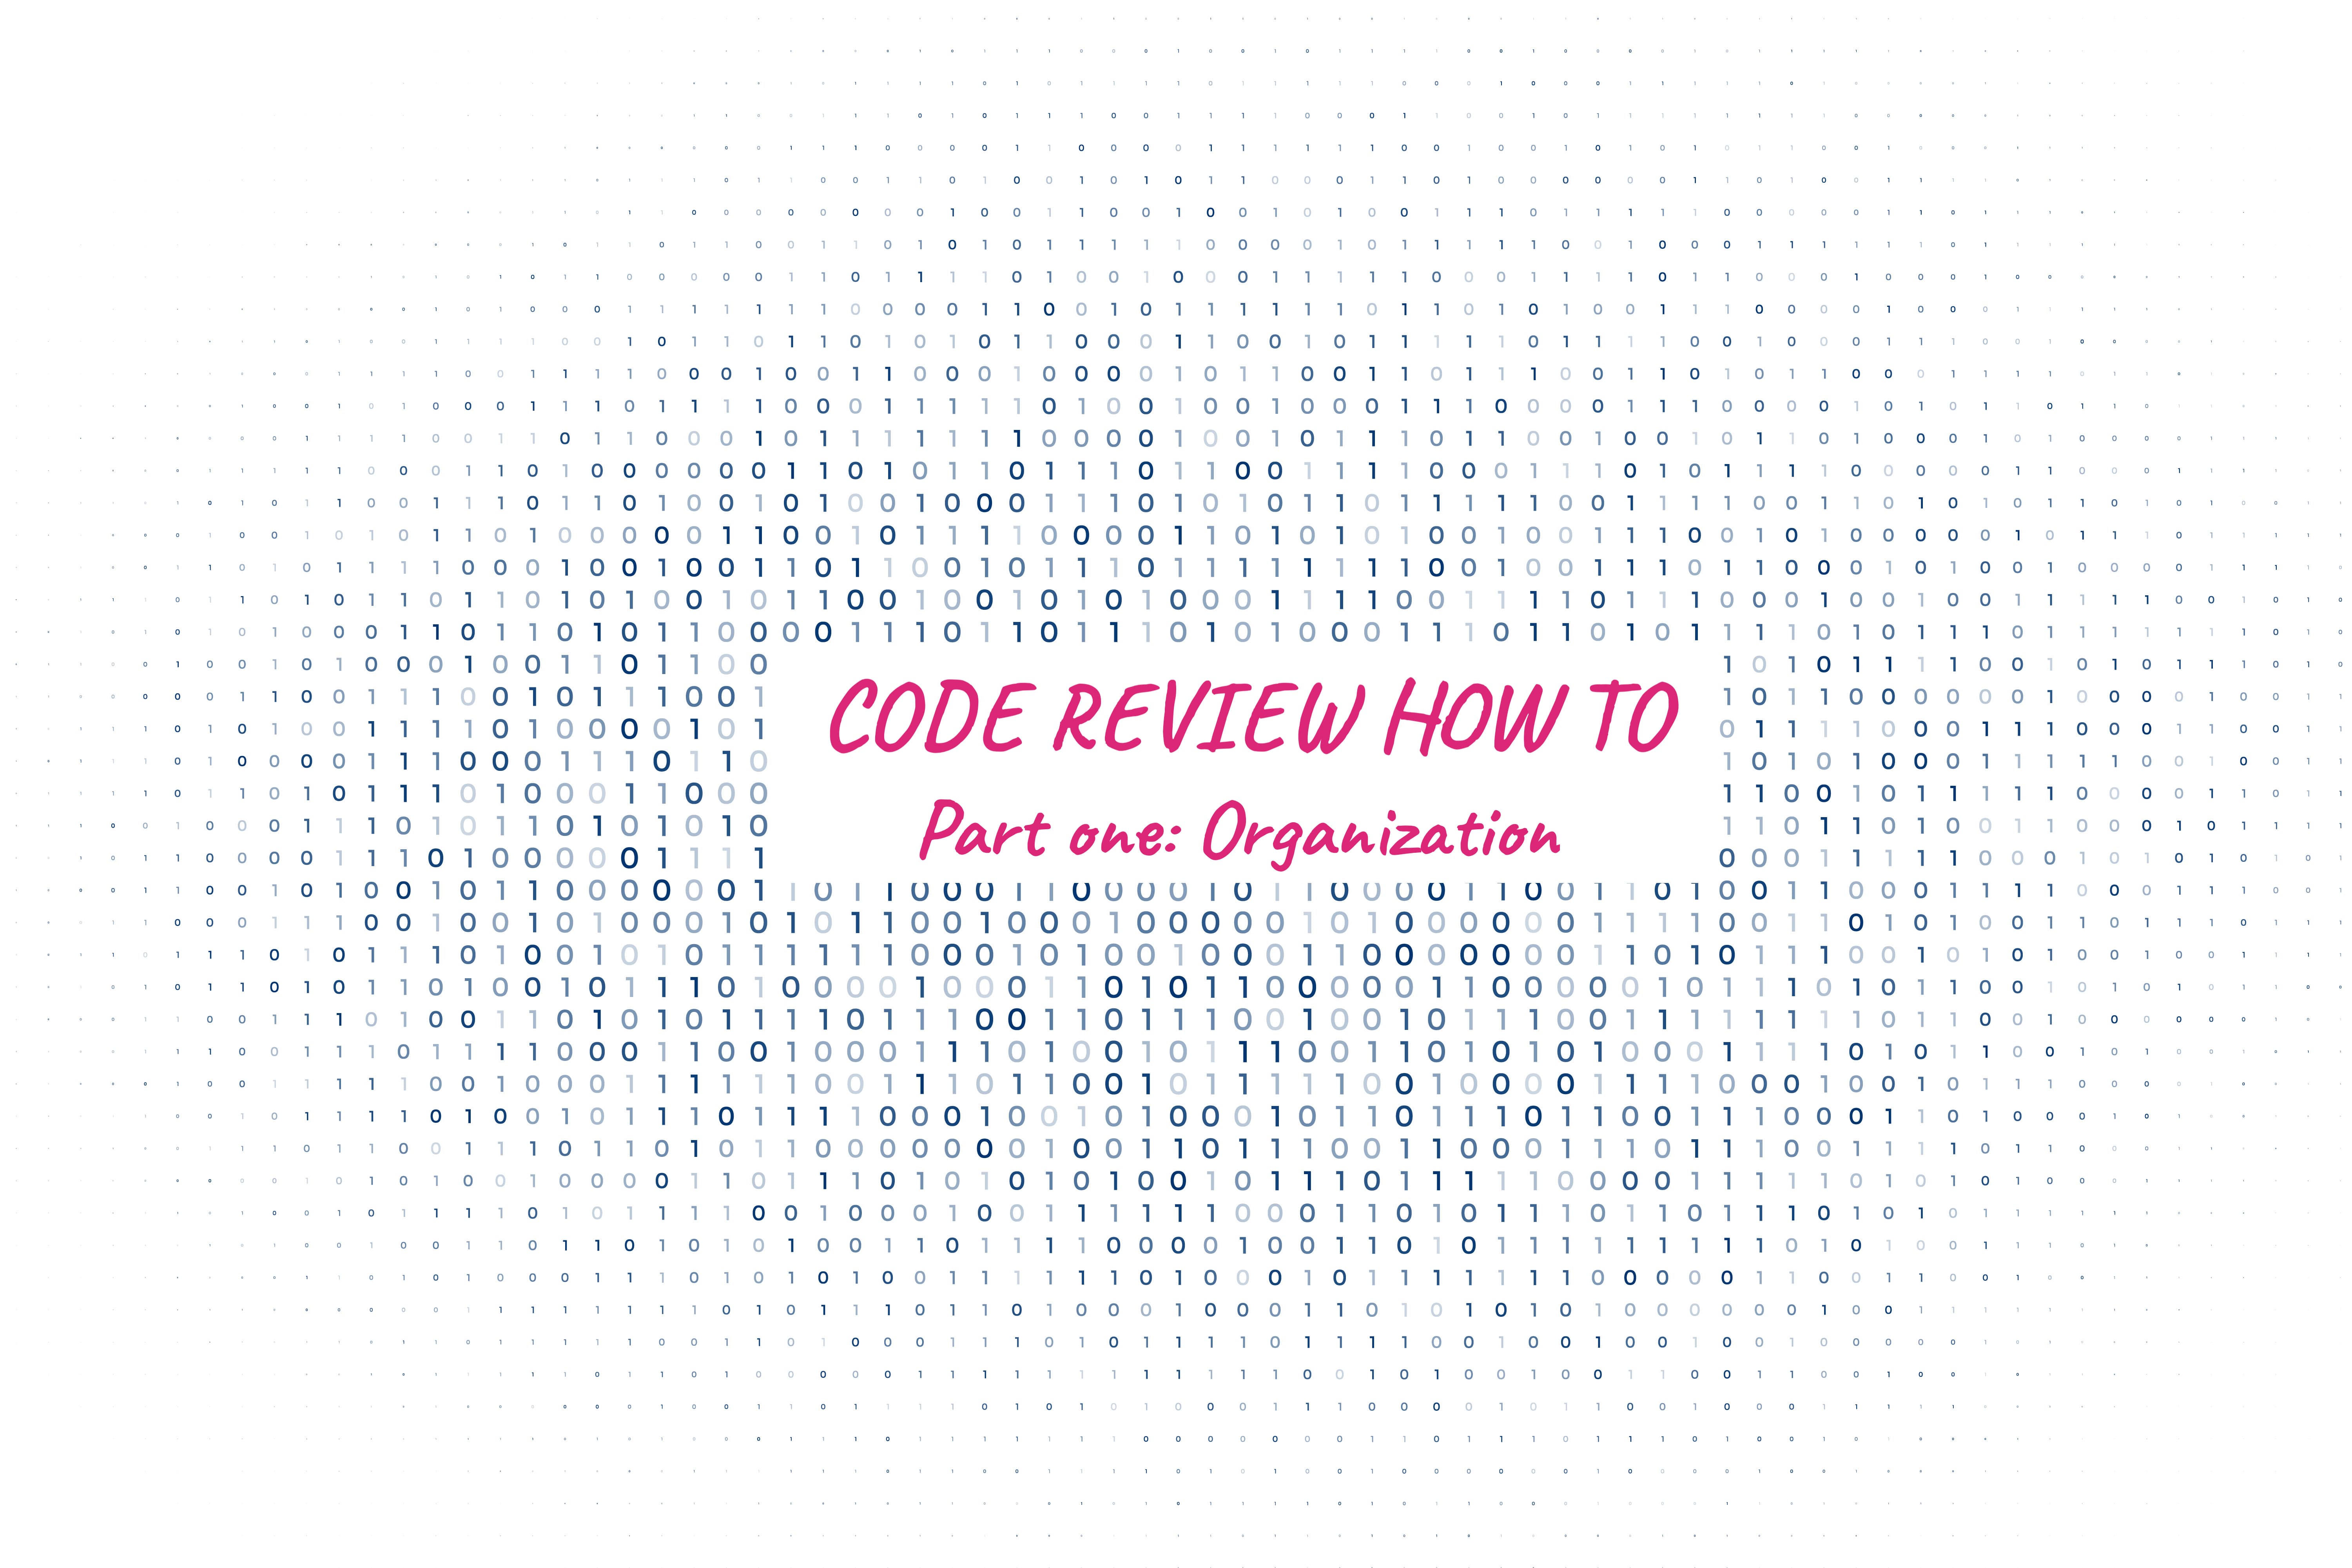 Title graphic, background of ones and zeroes with 'Code Review How To: Organization' overlayed on top